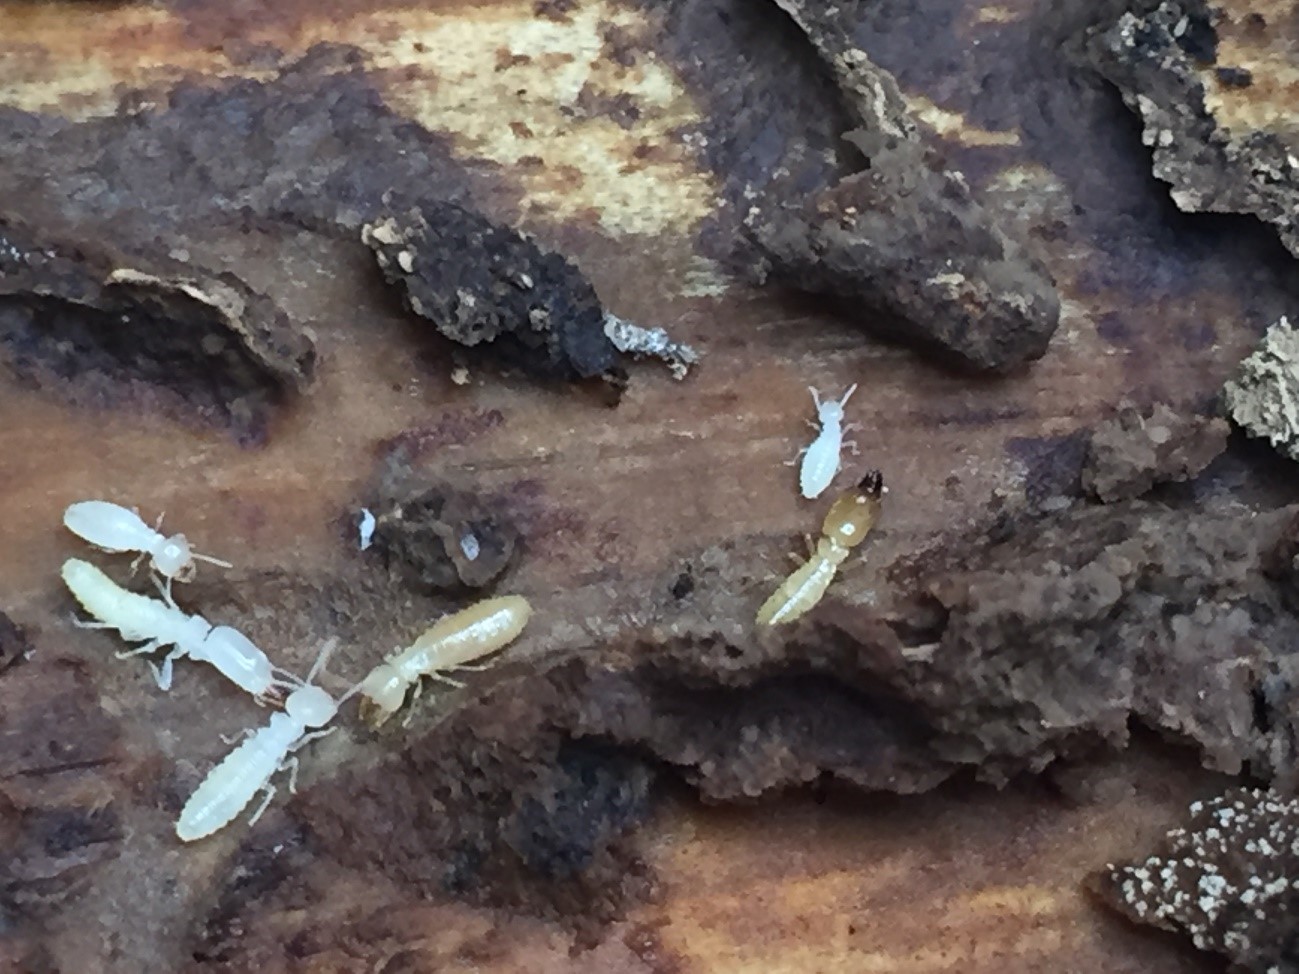 Termite damage (nymphs, workers and soldiers)